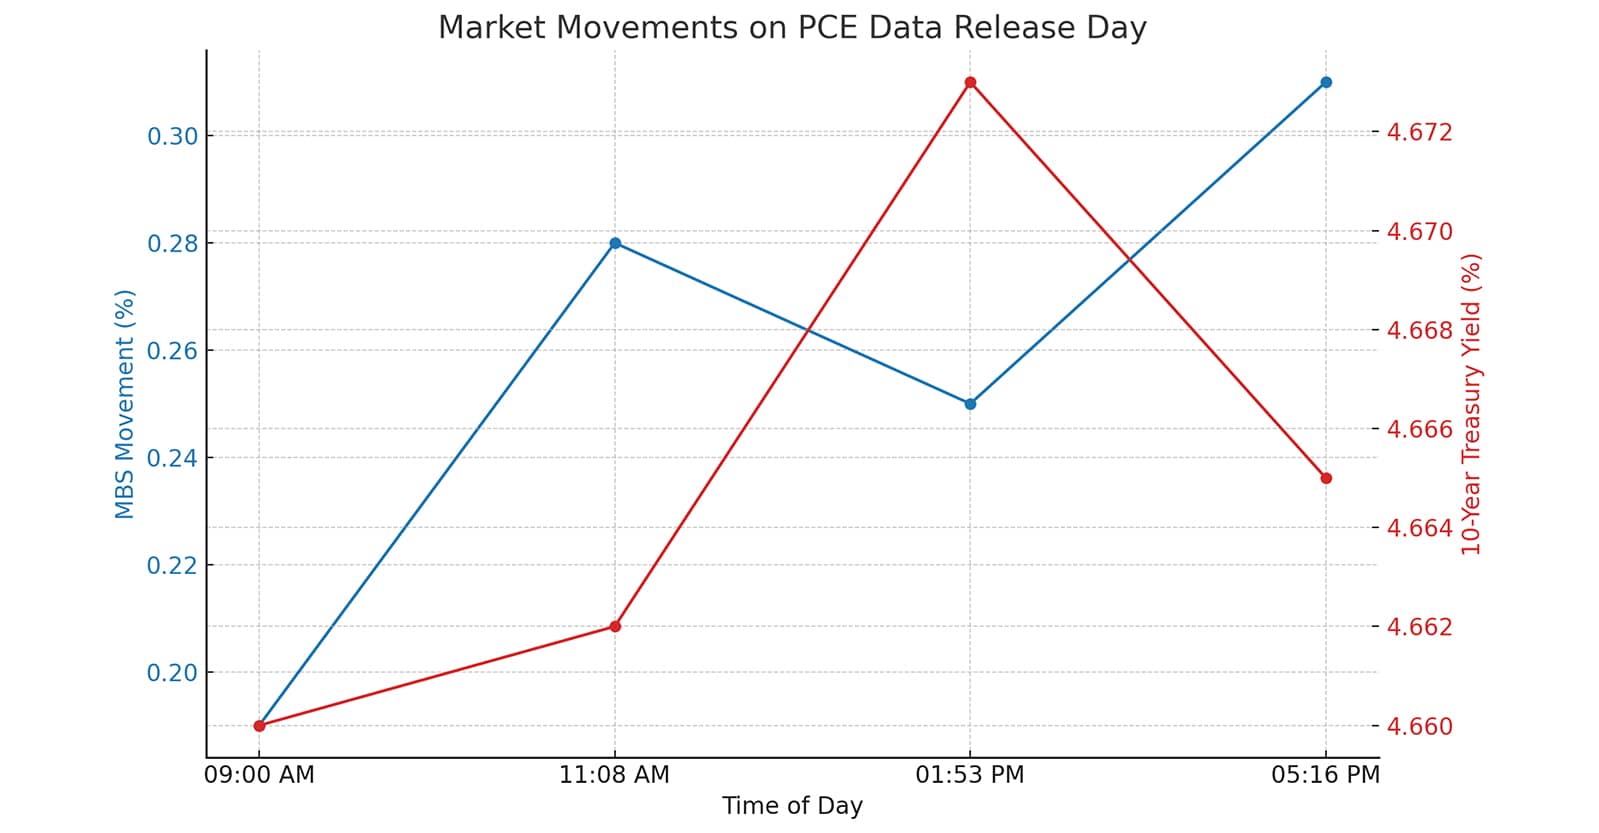 Market Movements on PCE Data Release Day